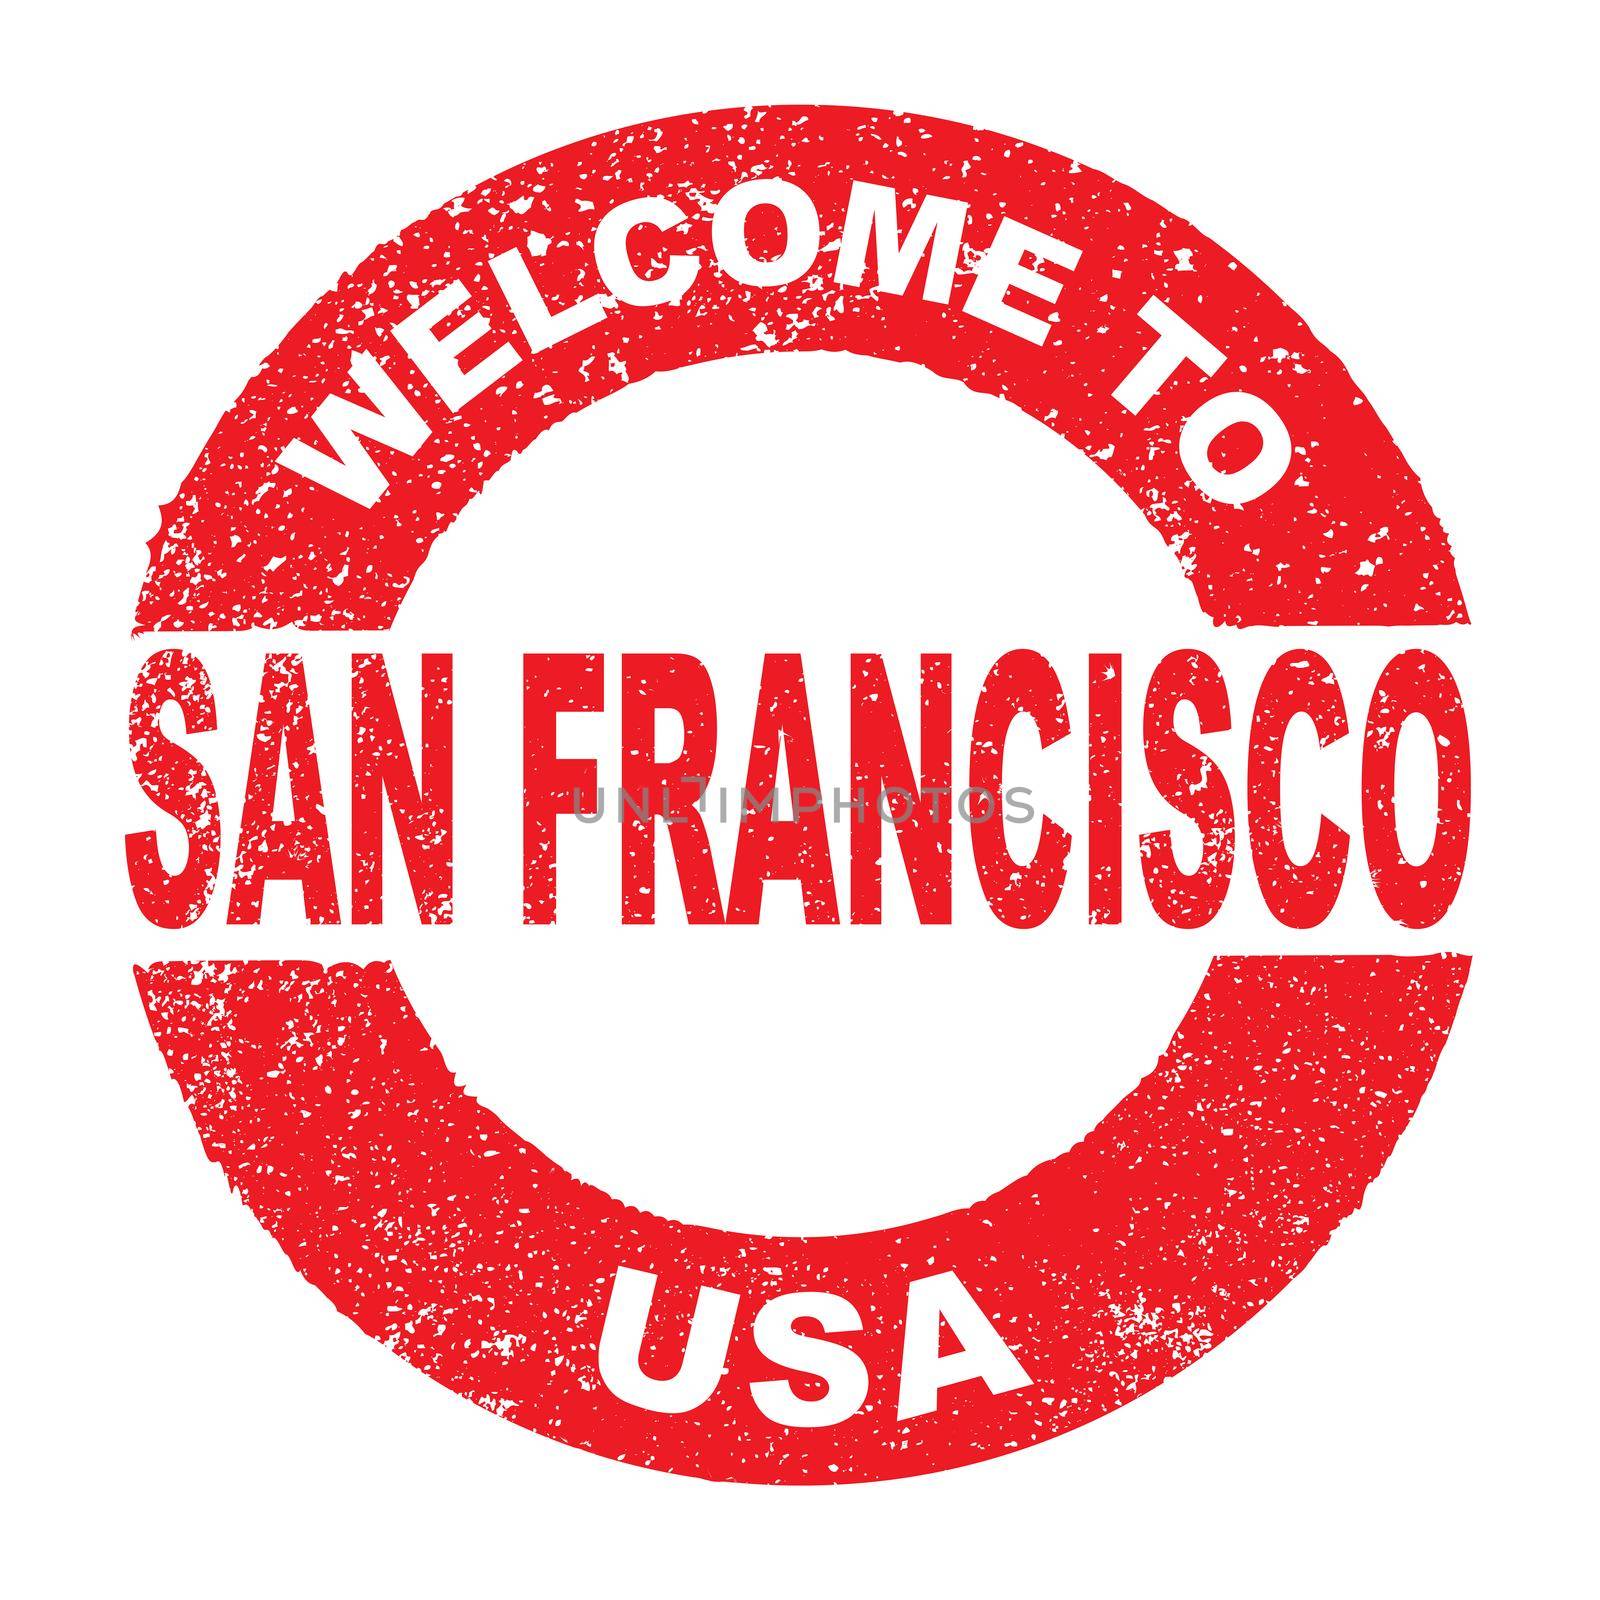 A grunge rubber ink stamp with the text Welcome To San Francisco USA over a white background